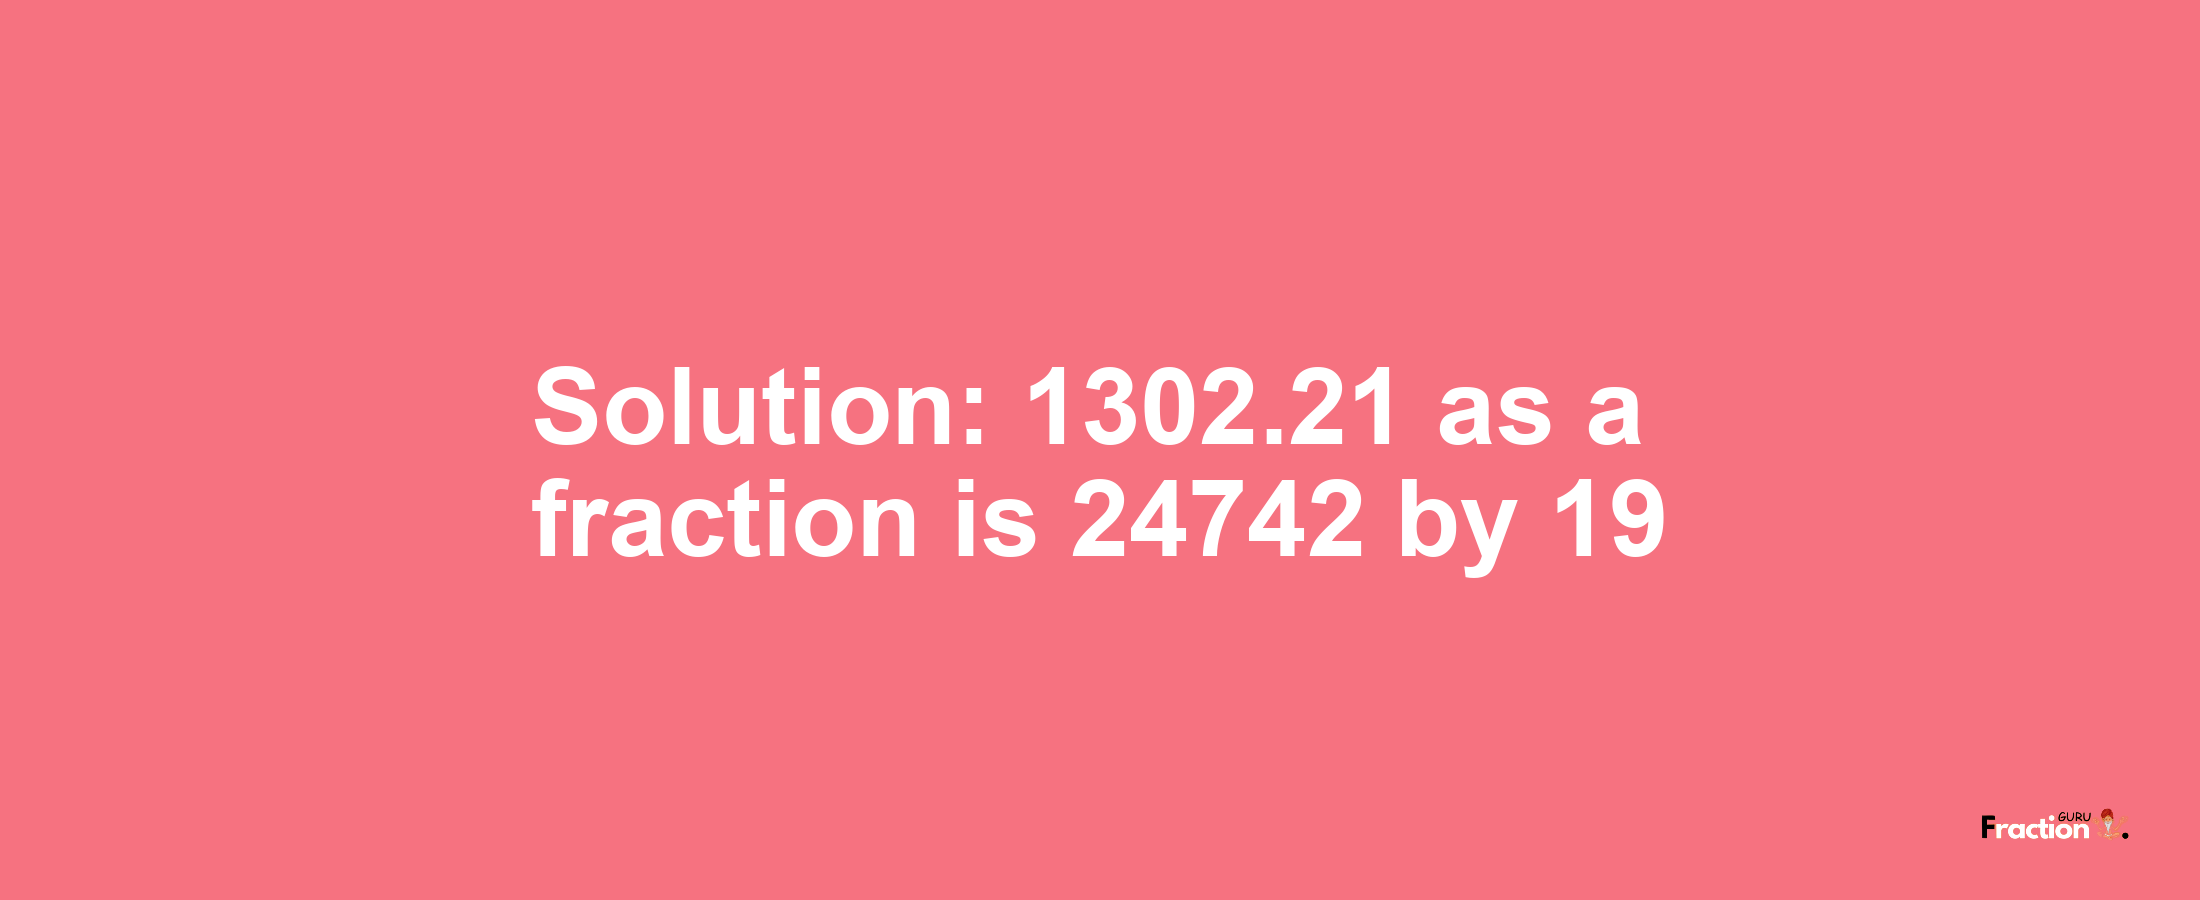 Solution:1302.21 as a fraction is 24742/19